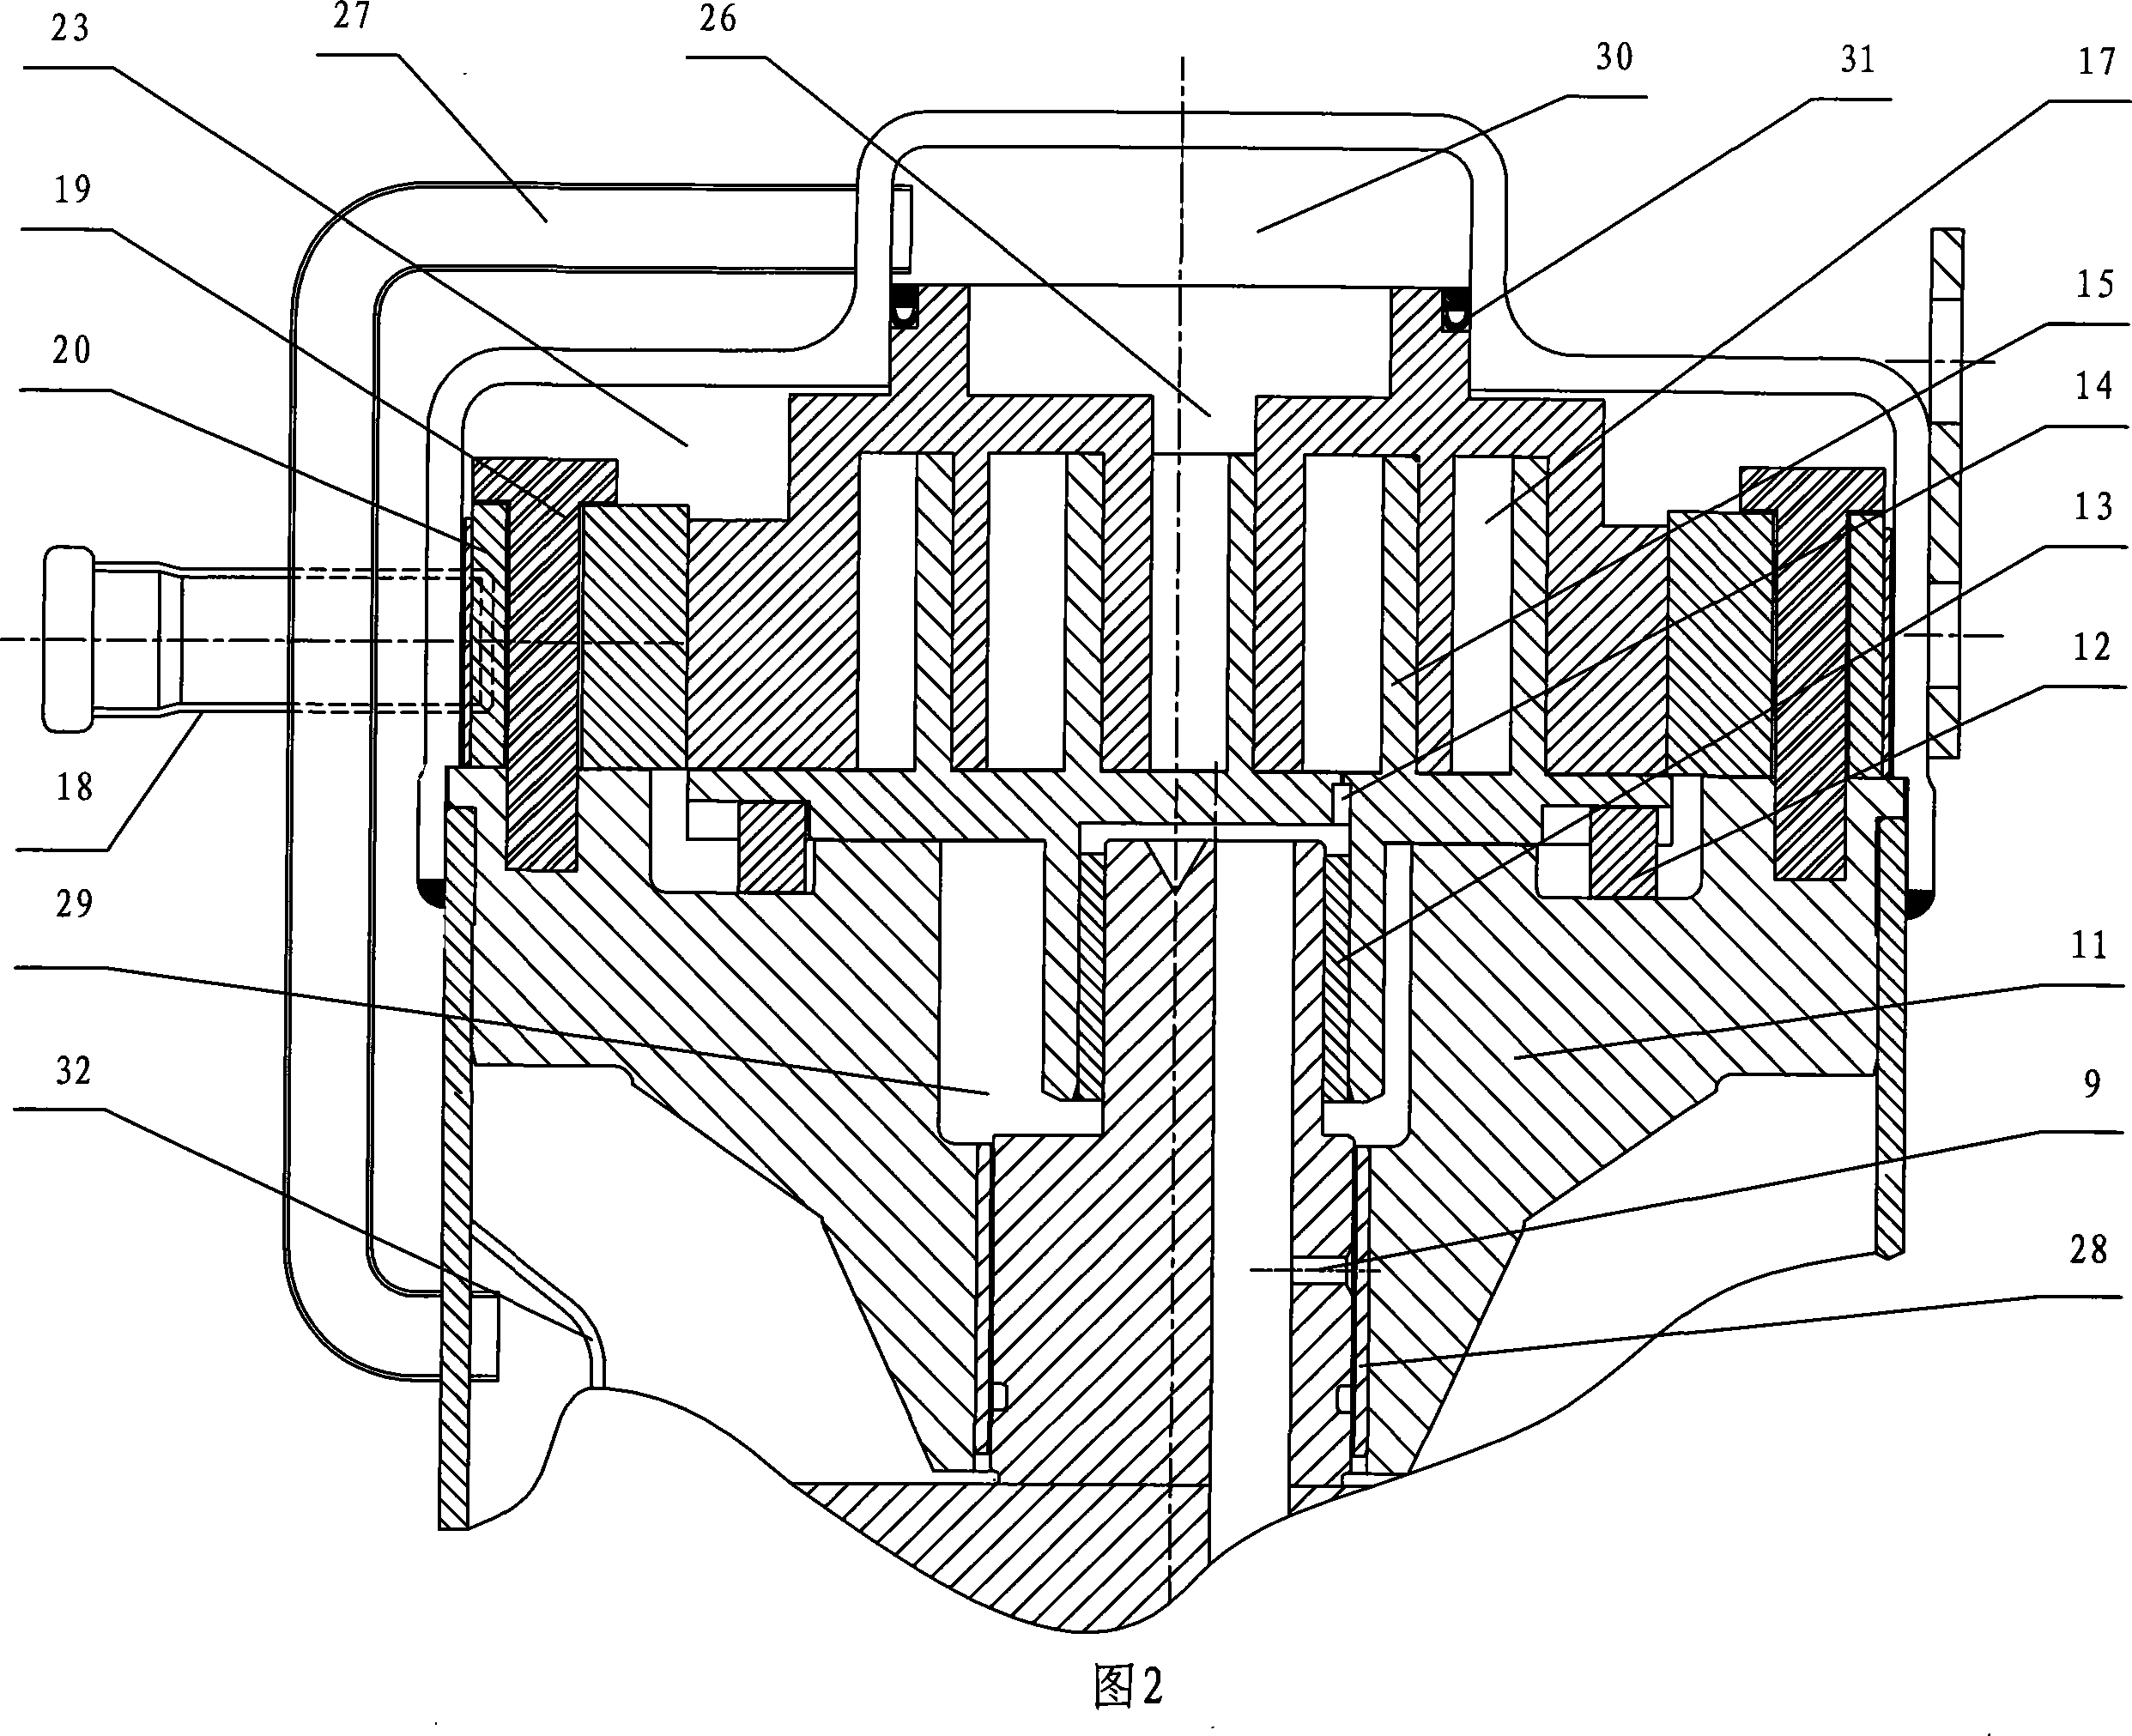 Swirl type compressor and its control method